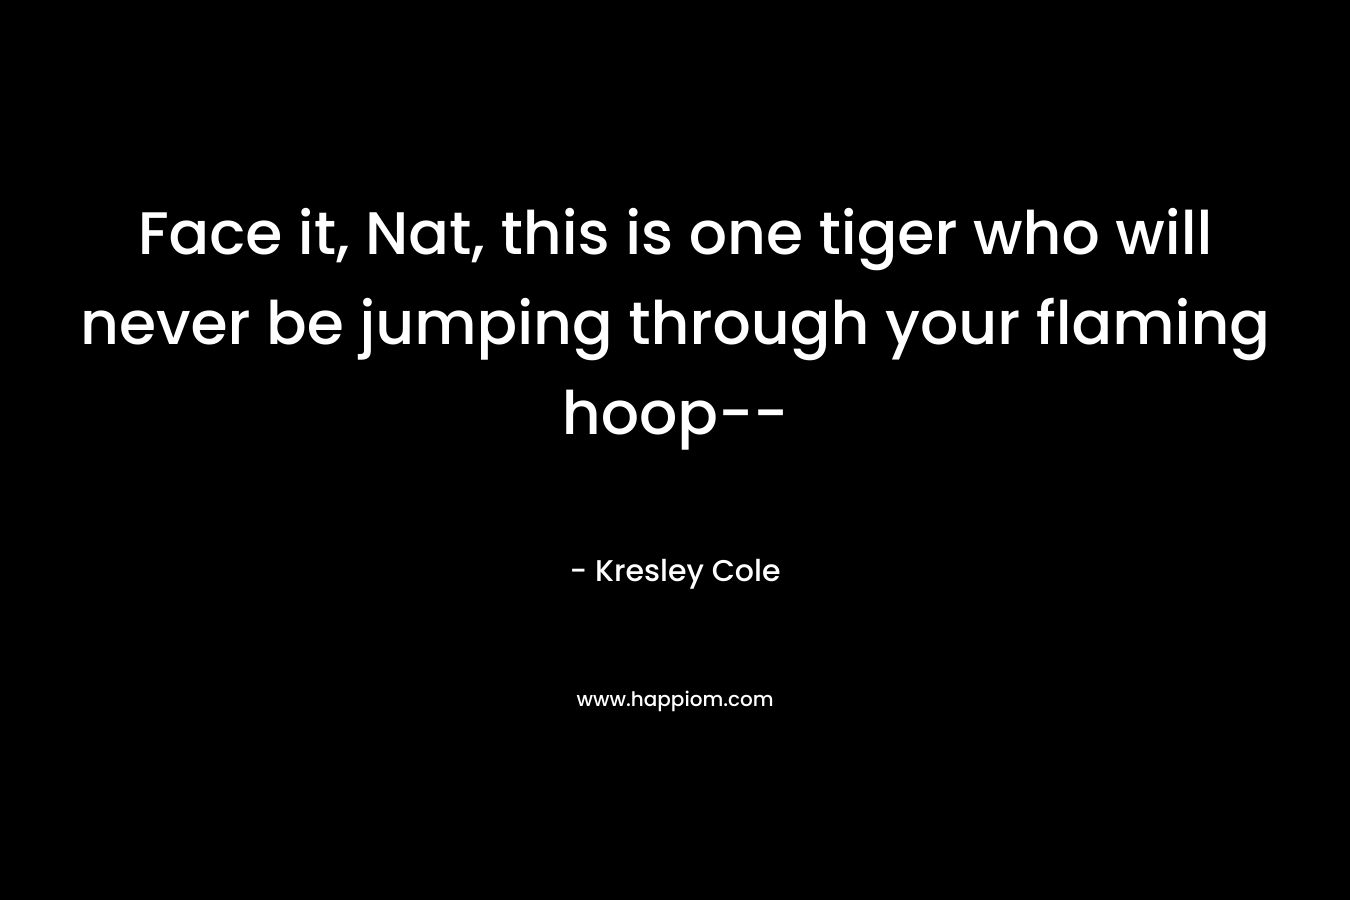 Face it, Nat, this is one tiger who will never be jumping through your flaming hoop--